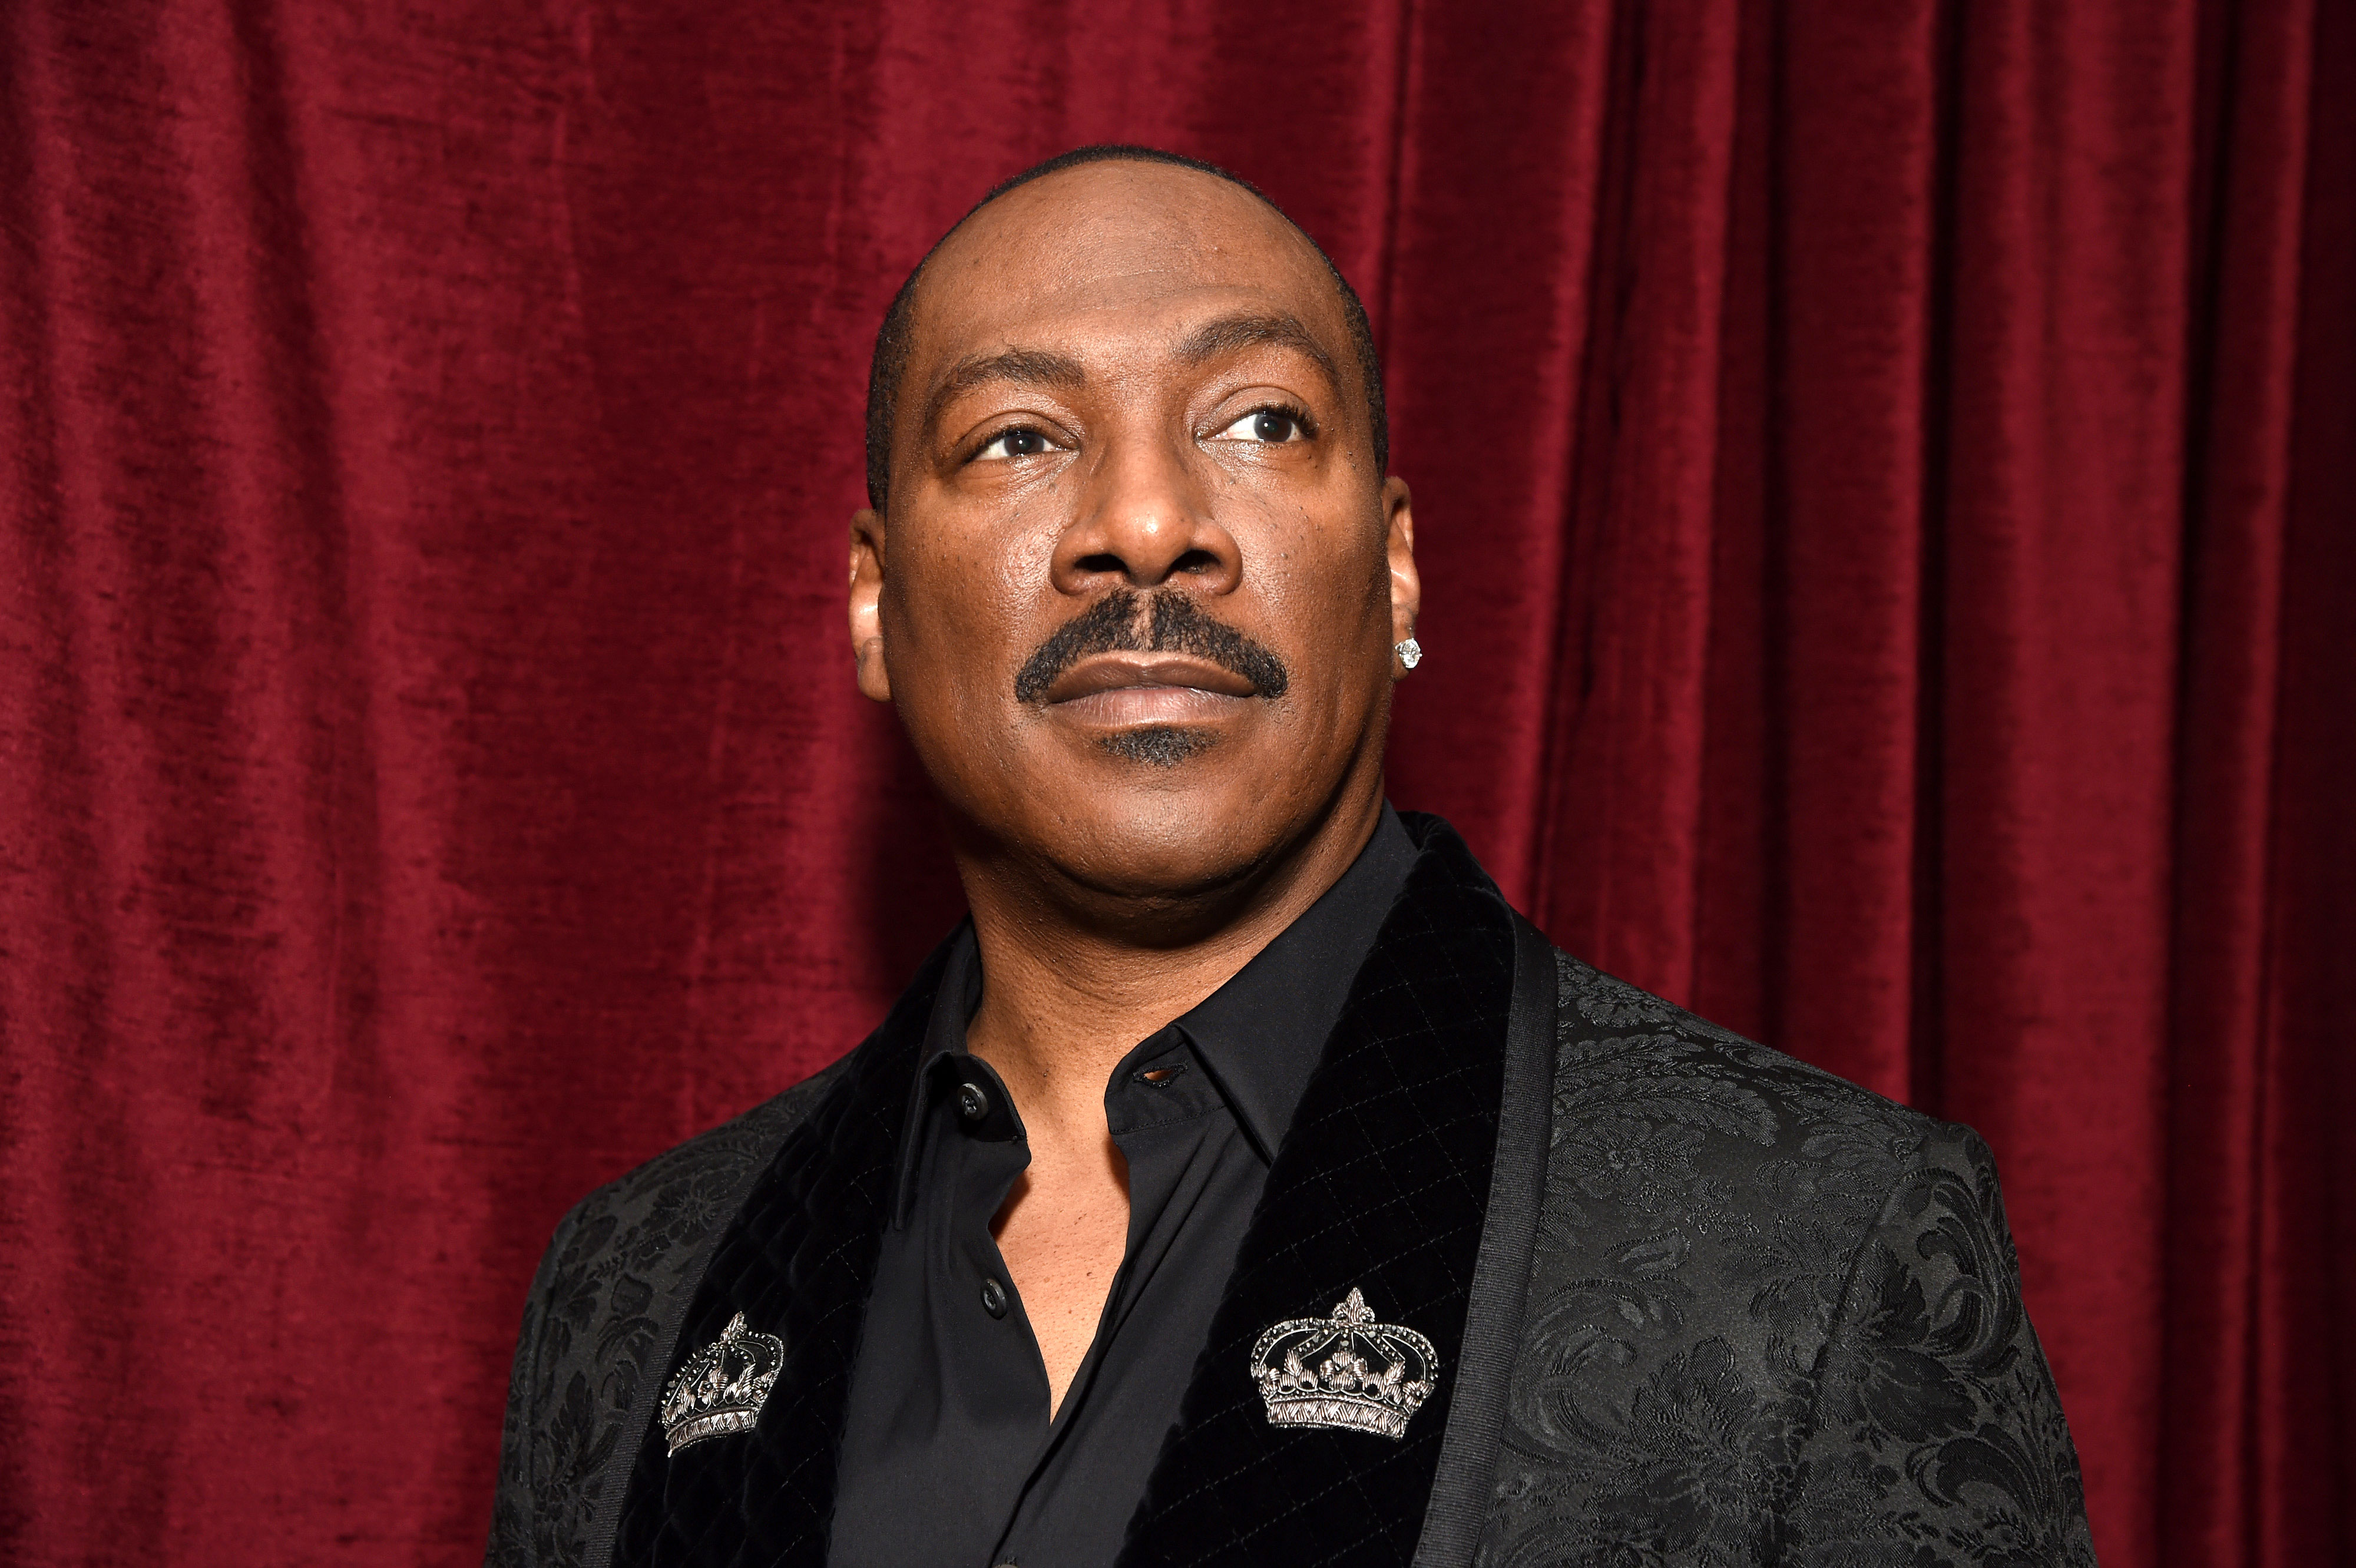 Know Actor Eddie Murphy's Net Worth - Career, Salary, Personal Life, and More!